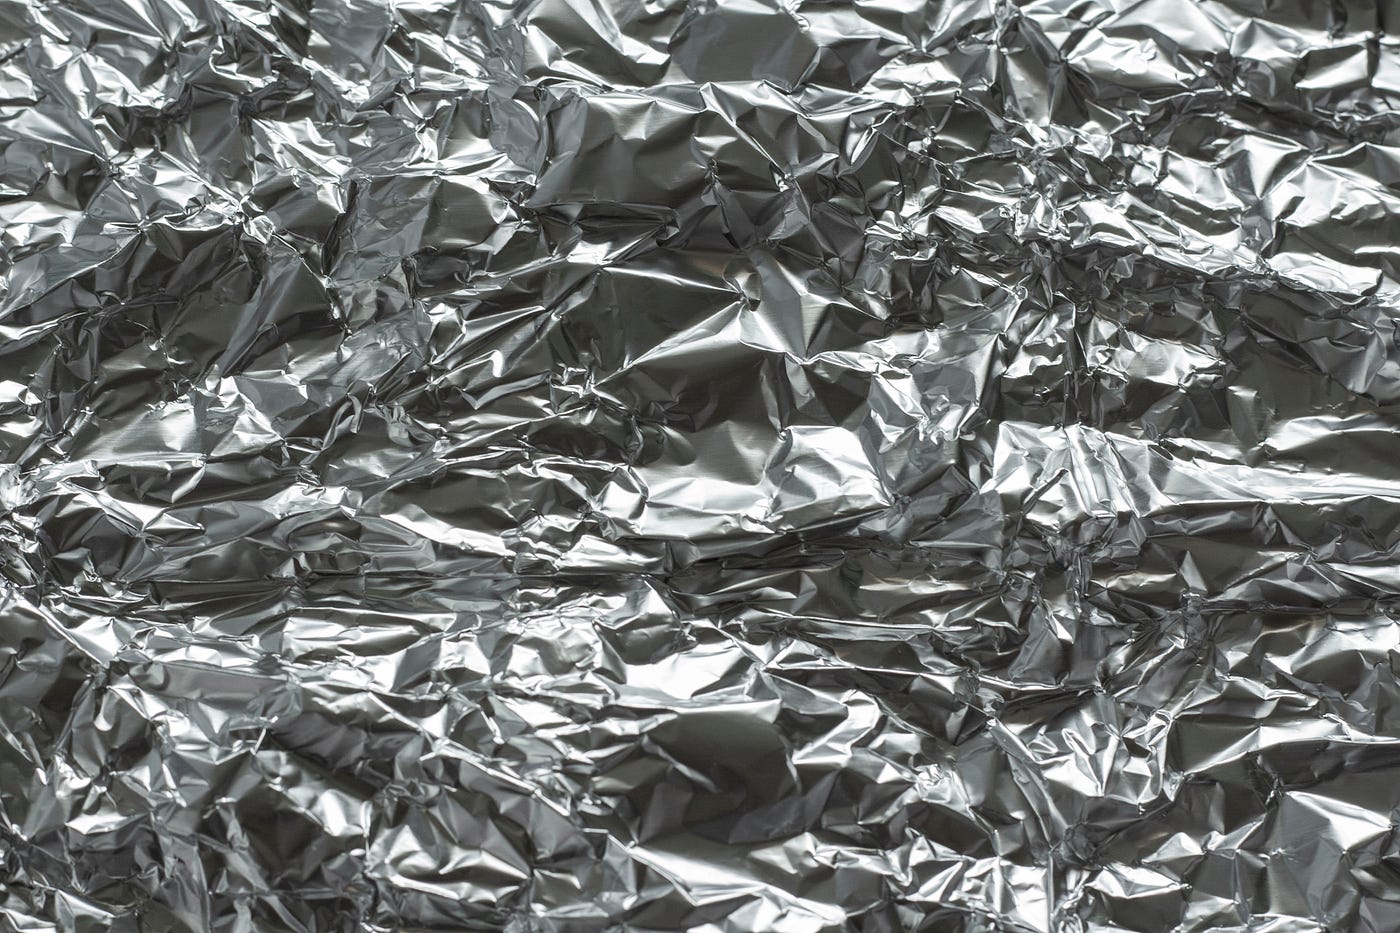 Is It Safe to Cook With Aluminum Foil? We Did a Deep Dive